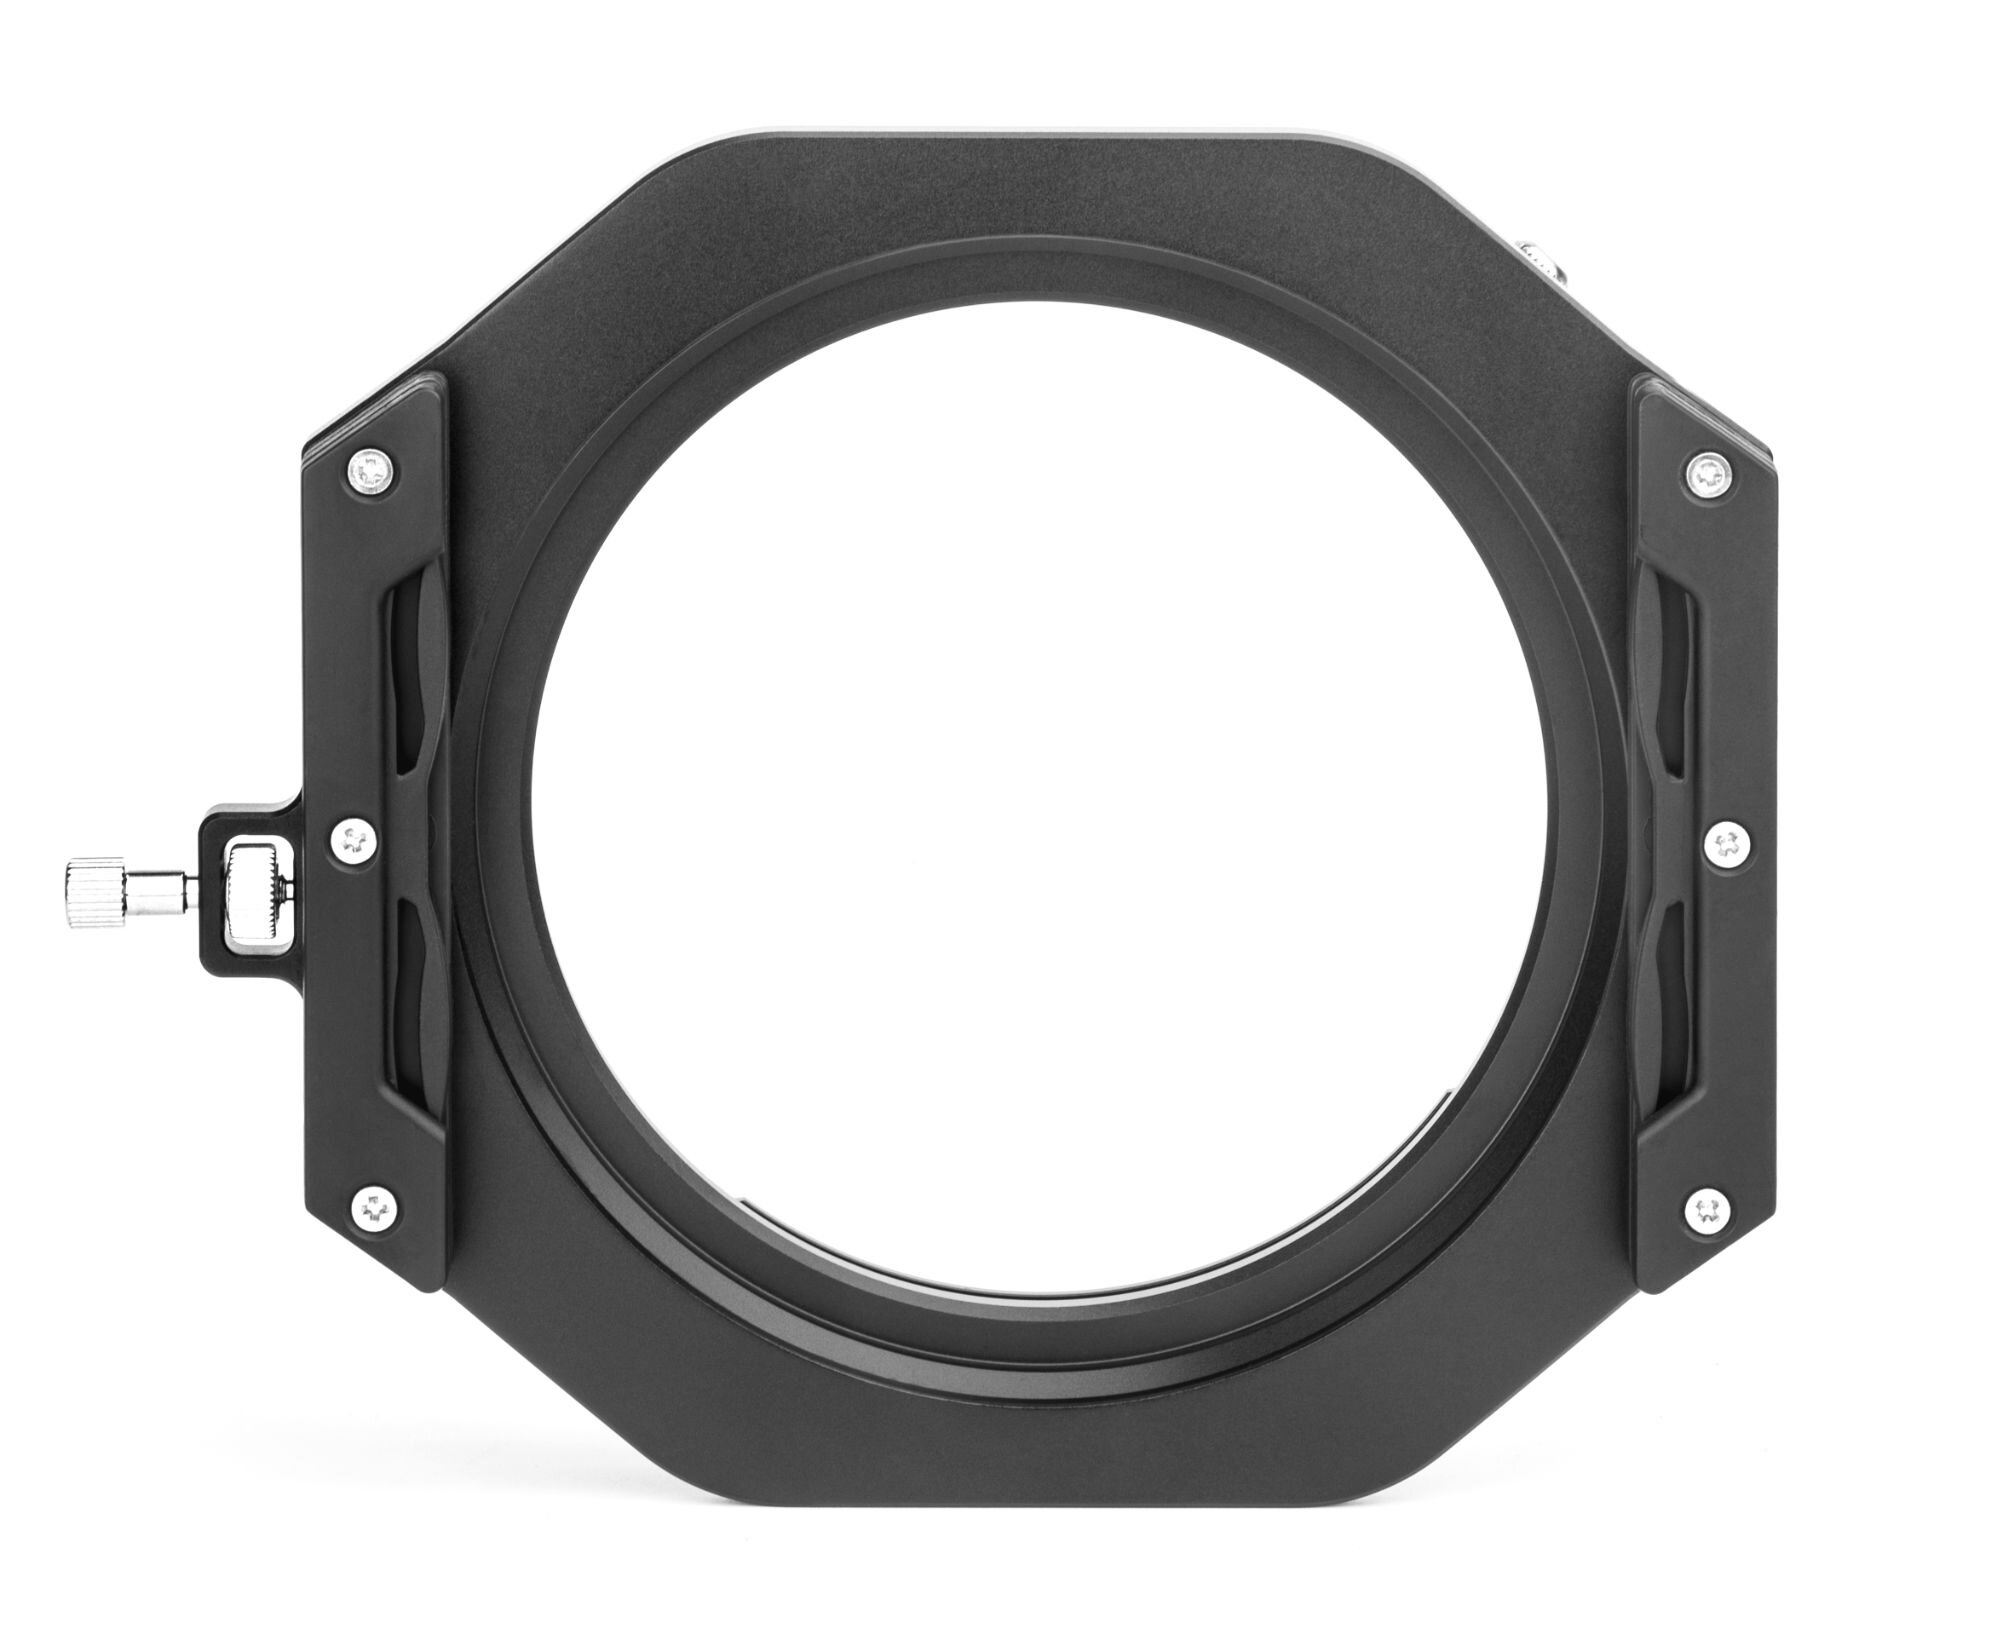 NiSi 150mm Aluminum Square Filter Holder Specially for Nikon 14-24mm,360 Degree Rotation,Without Vignetting Design 